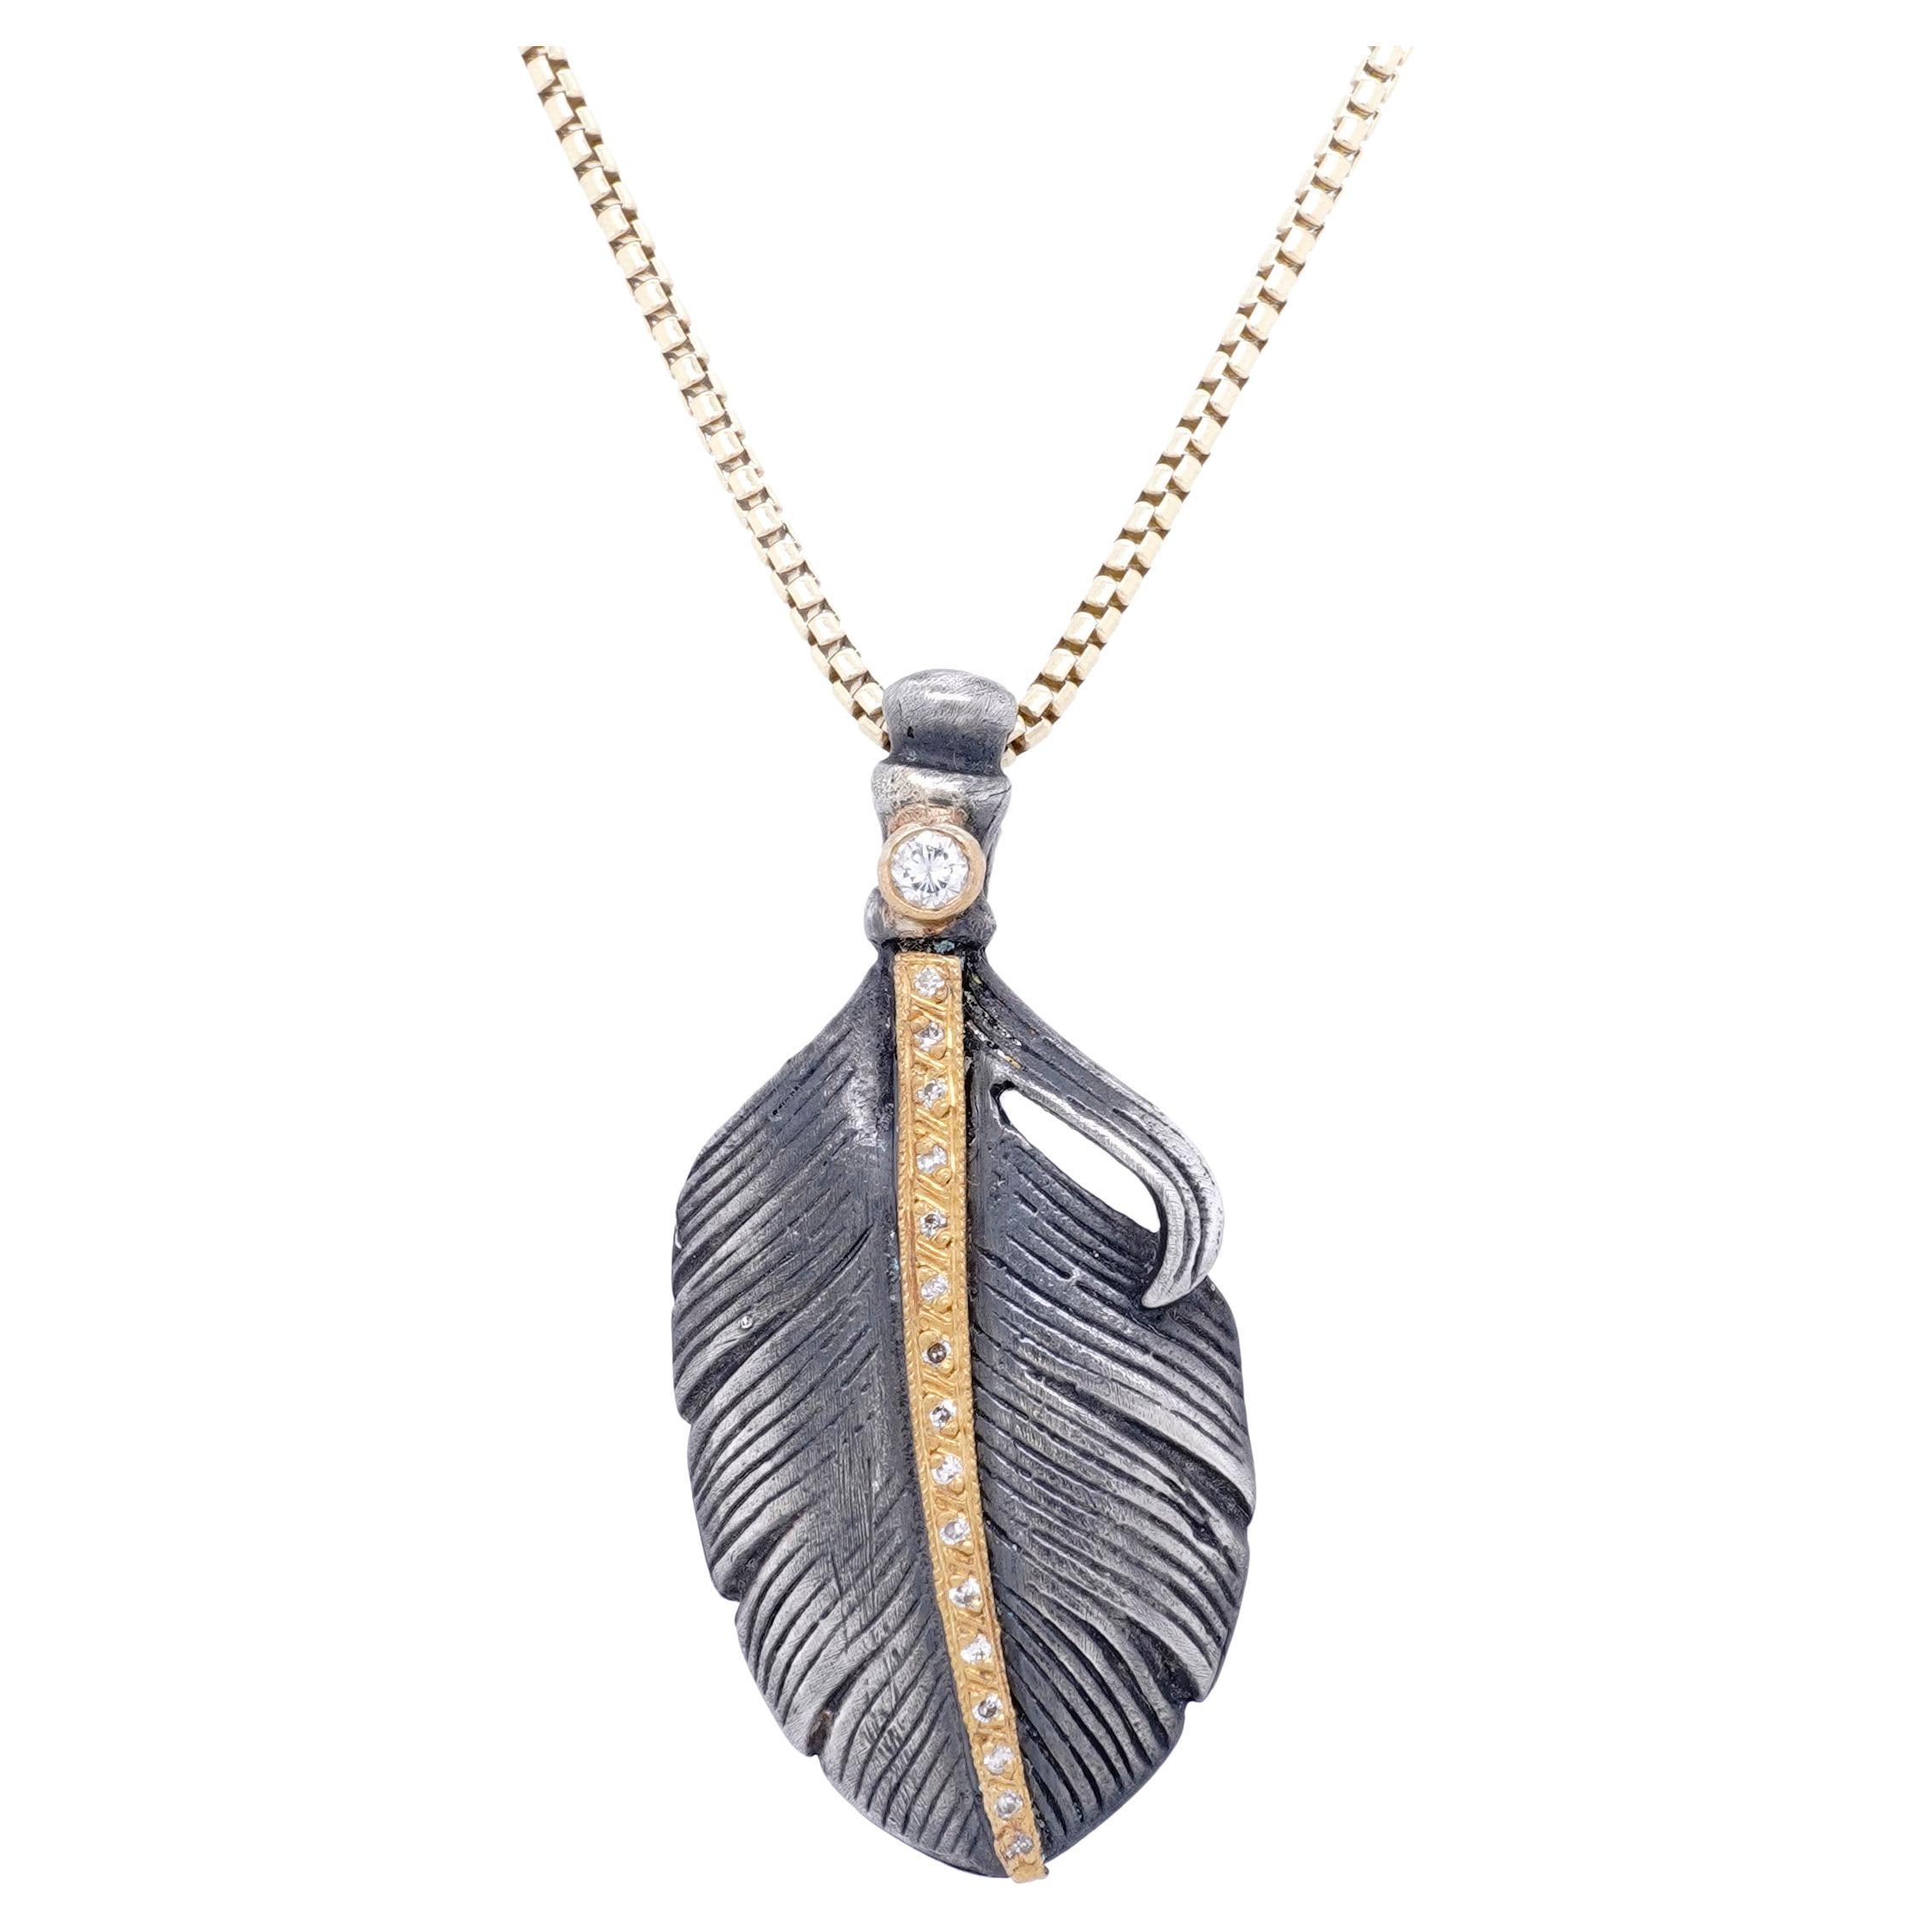 Feather with Diamonds, Charm Pendant Necklace, 24kt Gold and Silver by Prehistoric Works of Istanbul, Turkey. Measures: 15mm x 32mm (medium), Comes with 16